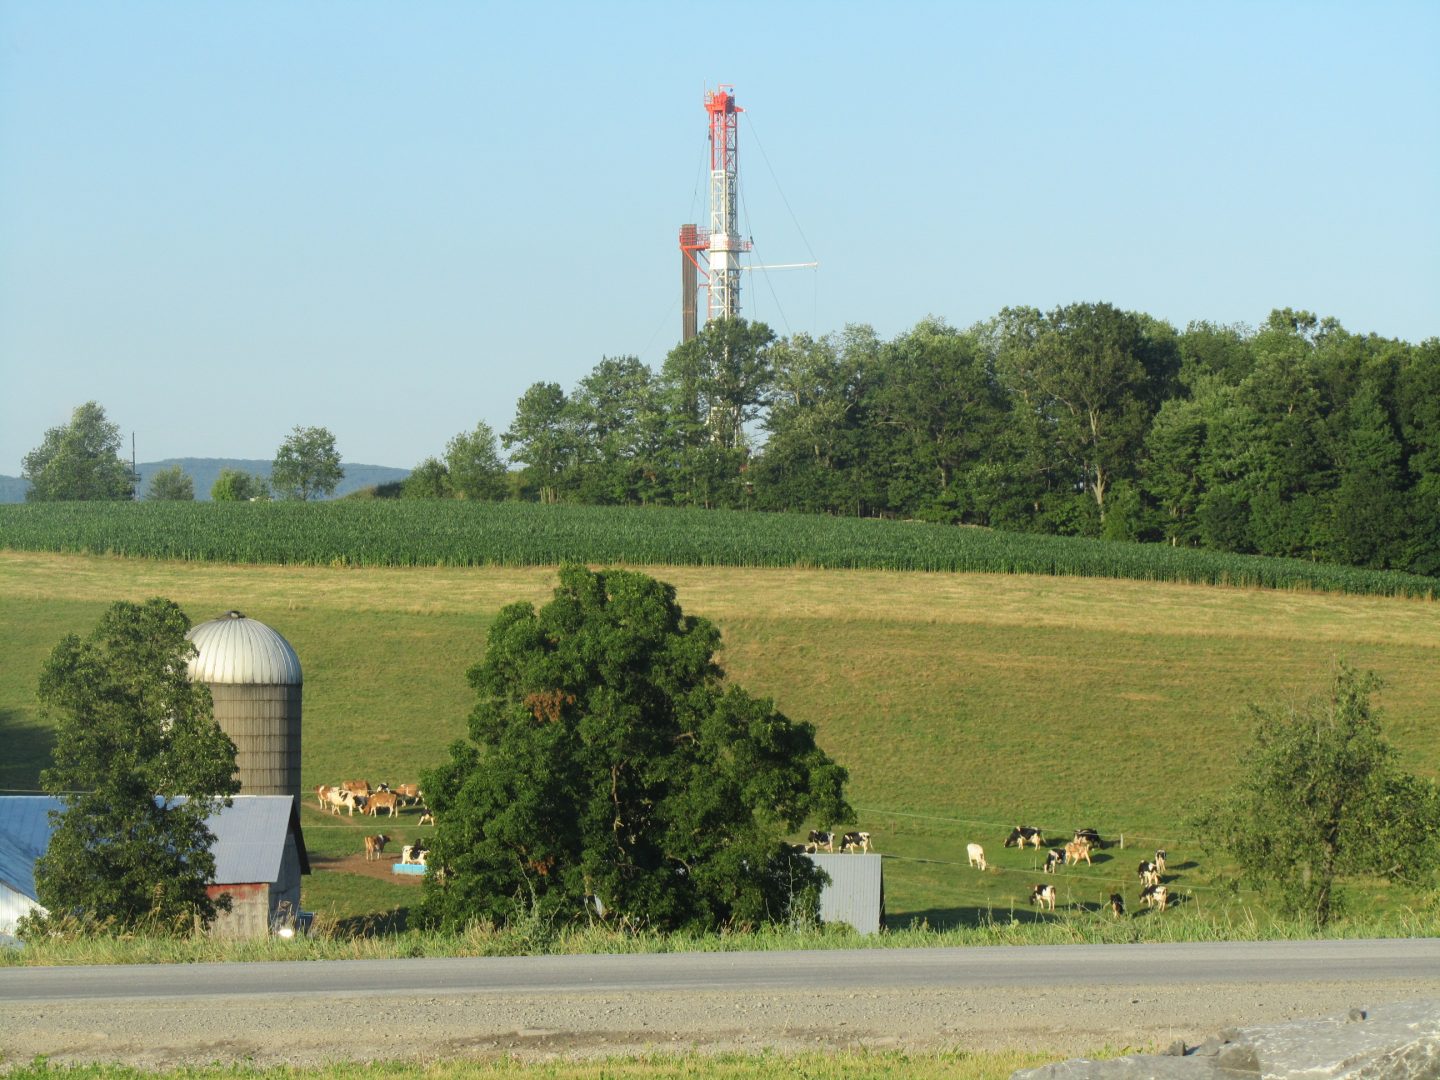 Drilling impact fees have generated $854 million for Pennsylvania over the past four years, but local governments have had trouble accounting for how they've spent the money.